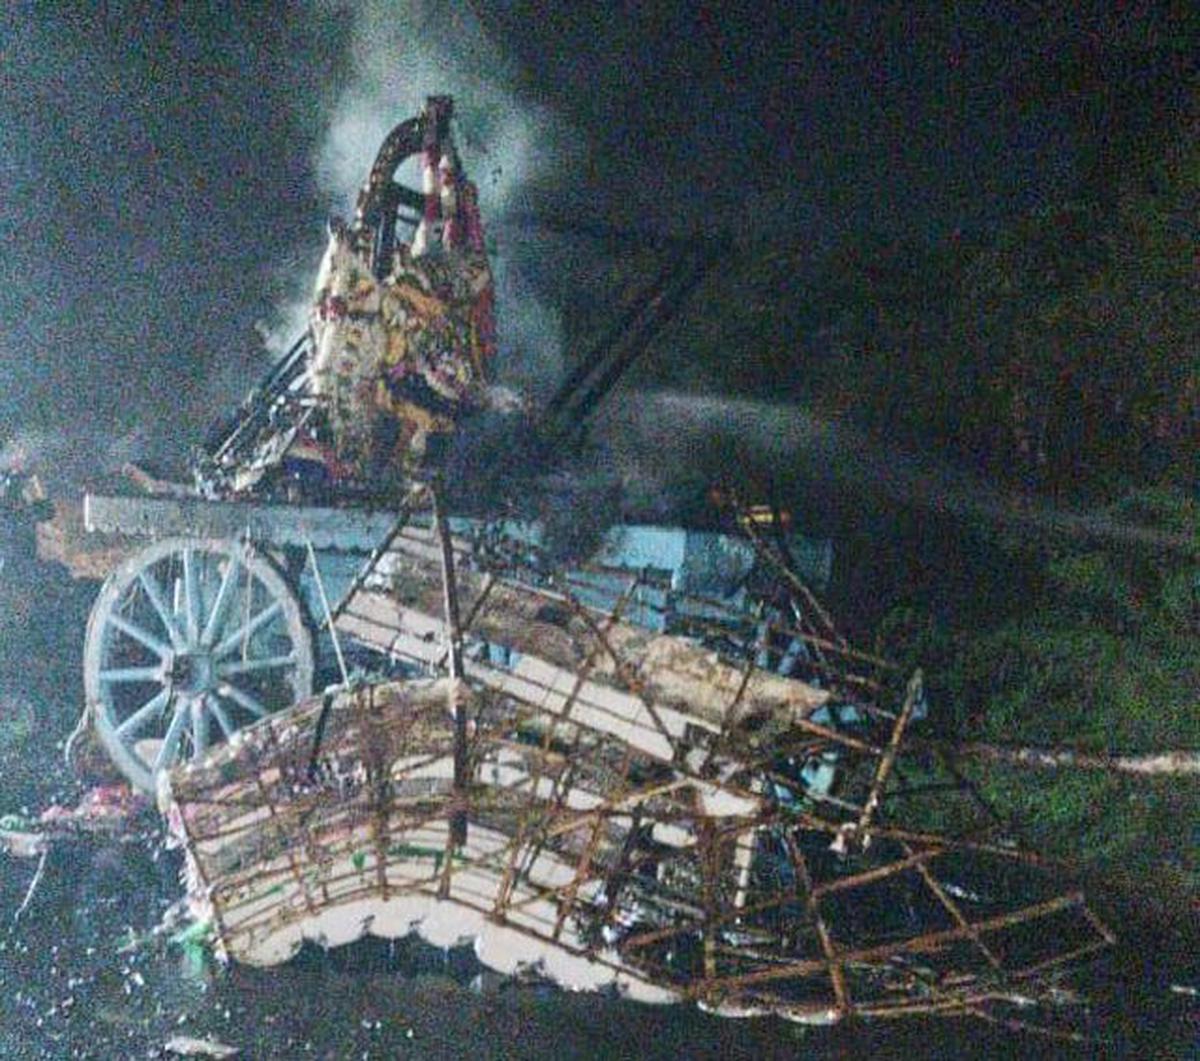 The mangled remains of the cart after the tragedy.  